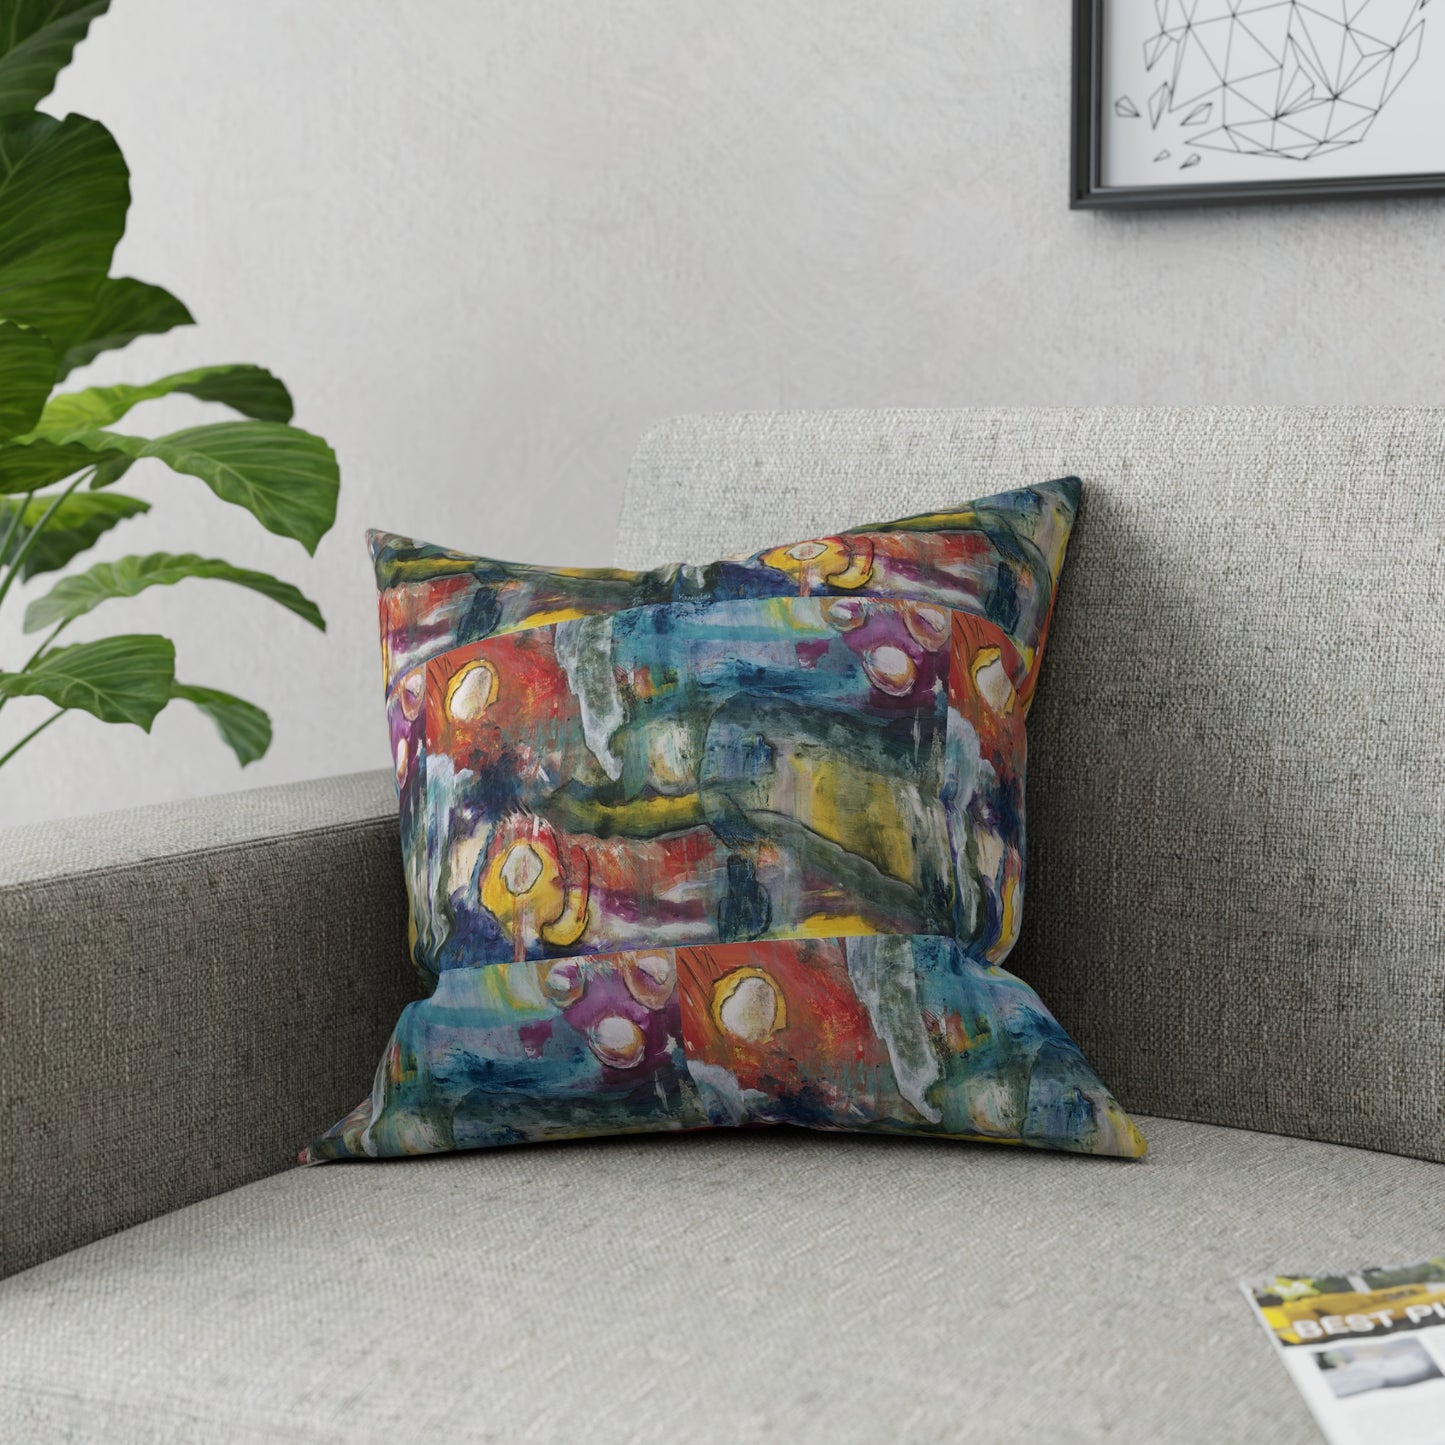 Soft Broadcloth Pillow: The Dream